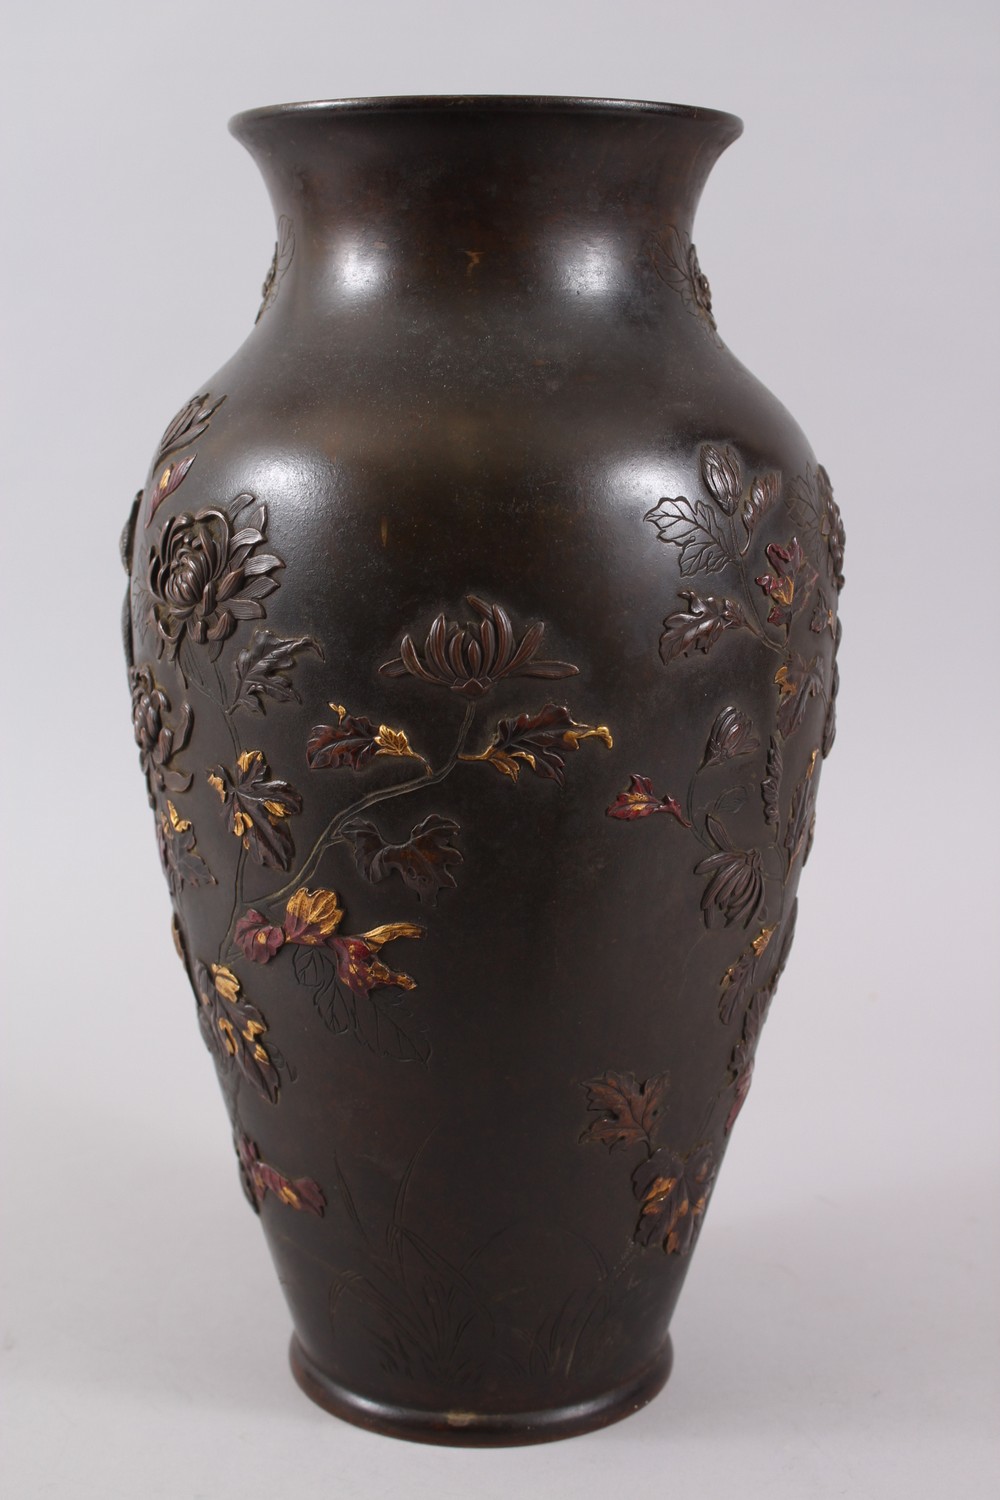 A GOOD JAPANESE MEIJI PERIOD BRONZE & MIXED METAL ONLAID VASE, depicting scenes of a peacock stood - Image 4 of 8